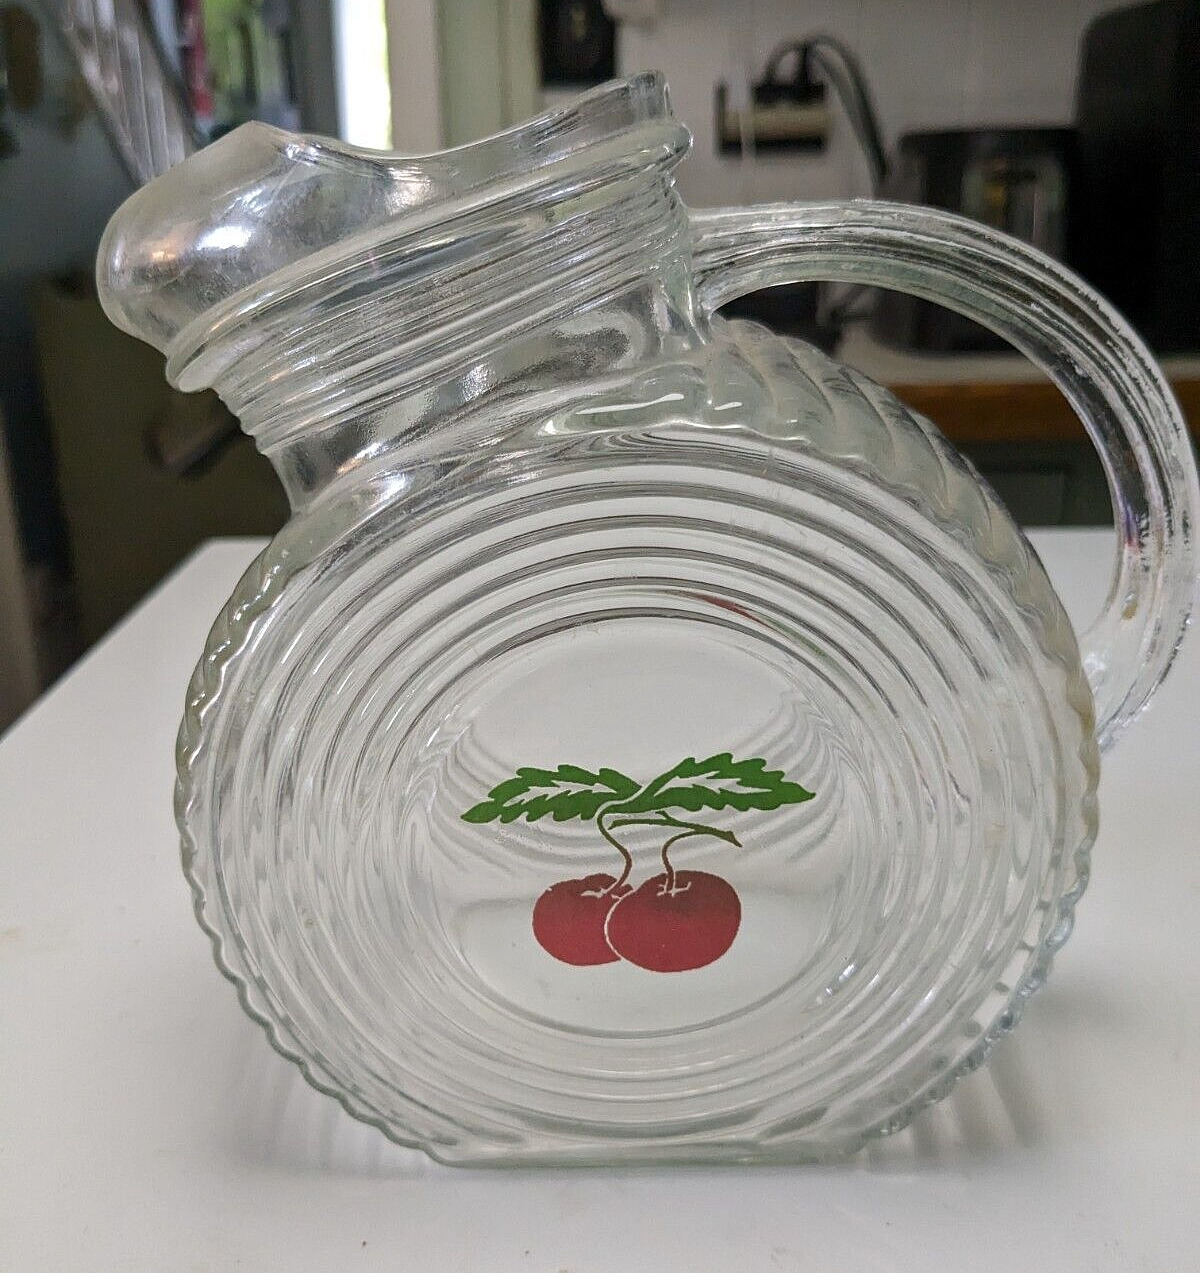 Art Deco Water Pitcher Wheel Design with Tomato 1940s